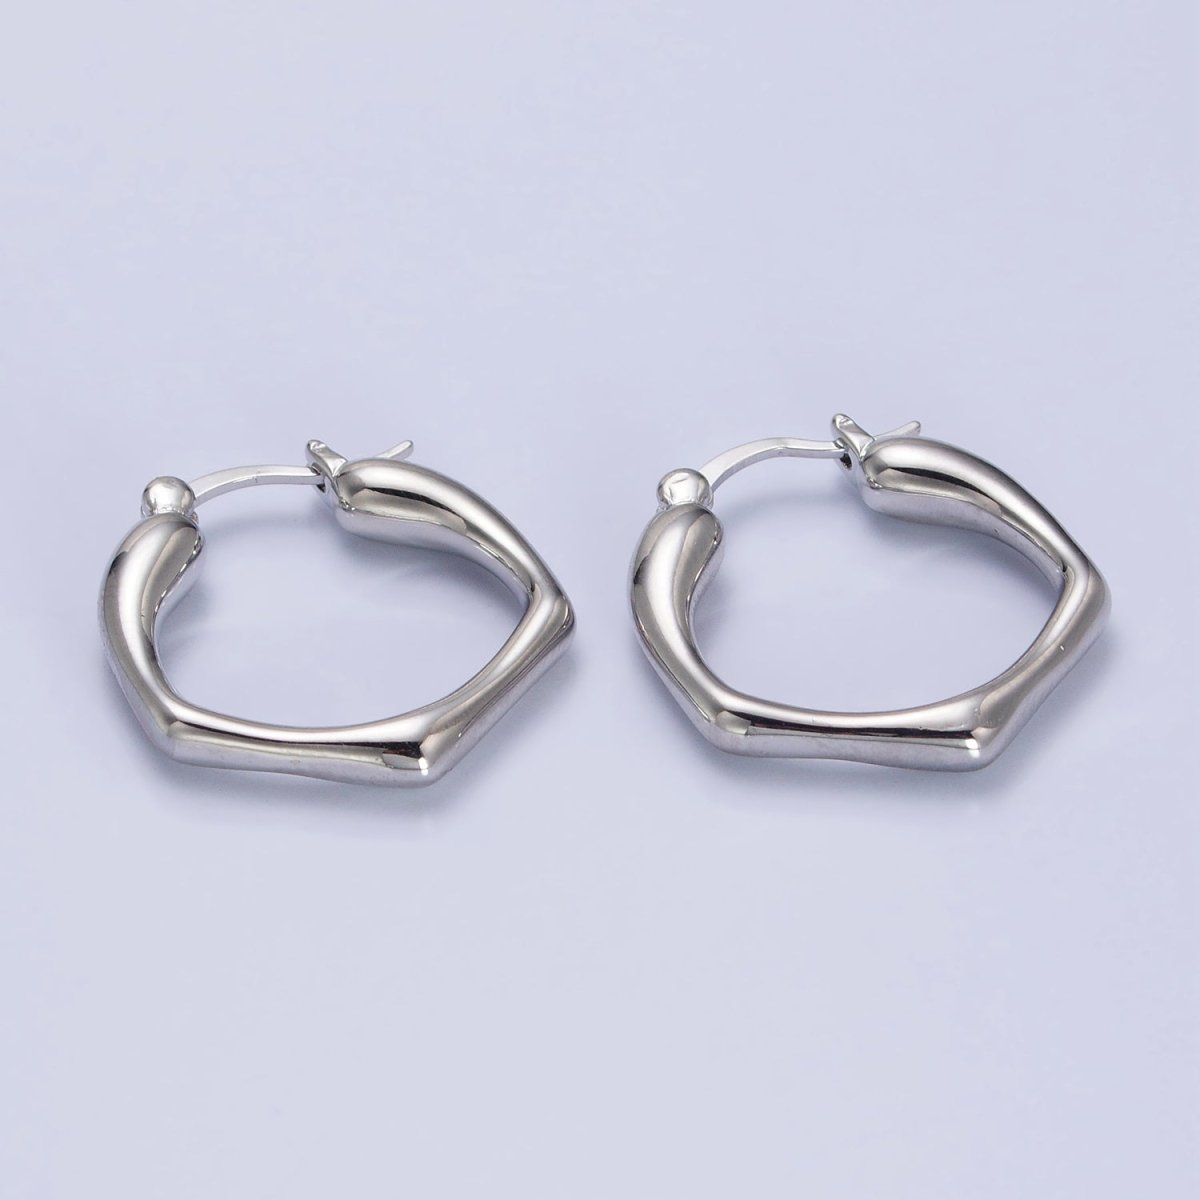 Gold, Silver Hexagonal Abstract Geometric 25mm Latch French Lock Hoop Earrings | AB916 AB444 - DLUXCA